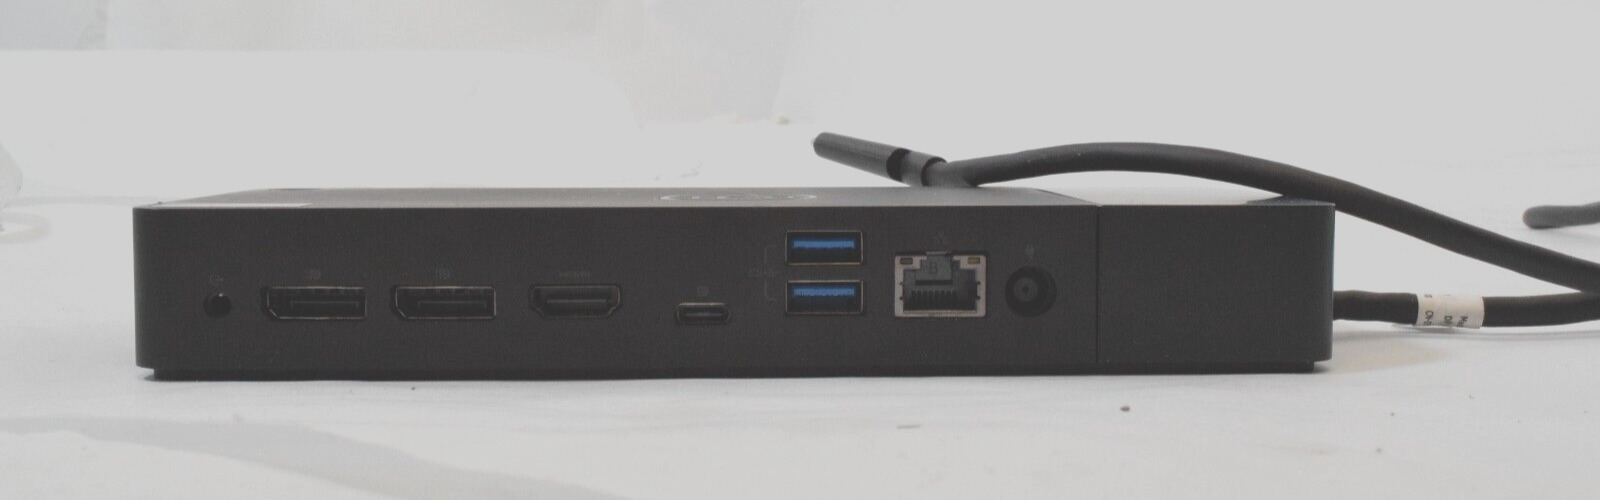 Genuine Dell Docking Station WD19TB | Good Condition | No A/C cable